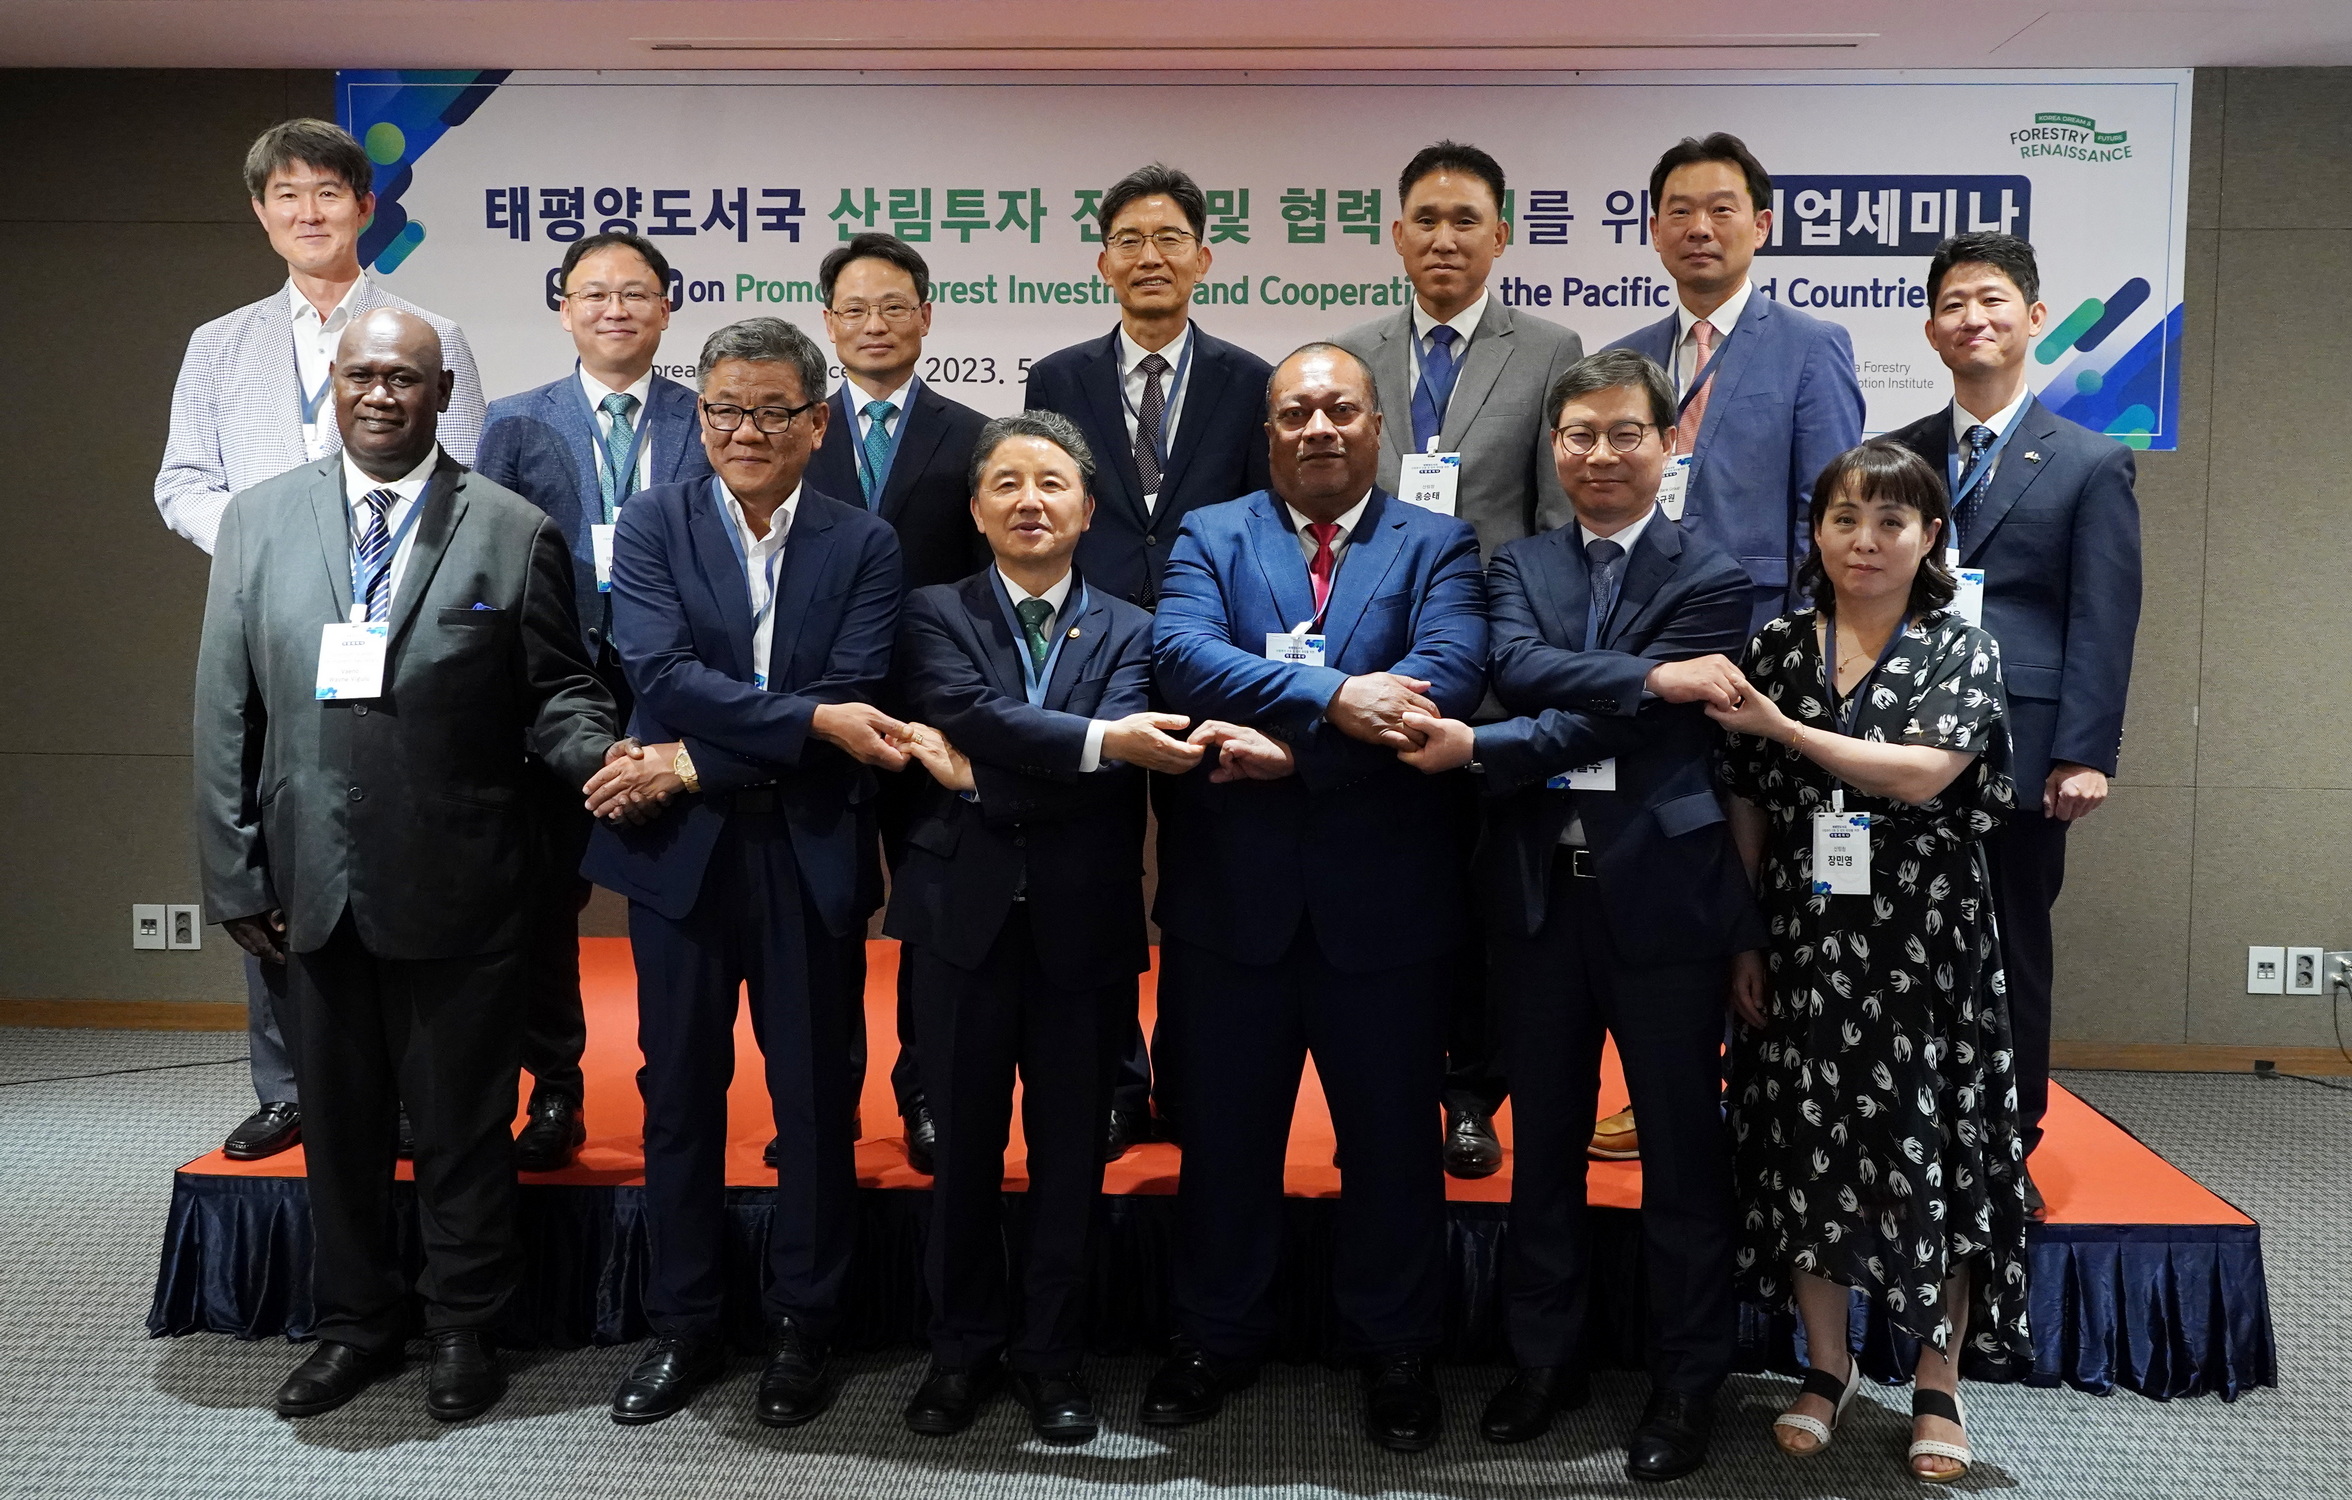 Seminar promoting corporate forest investment 이미지3